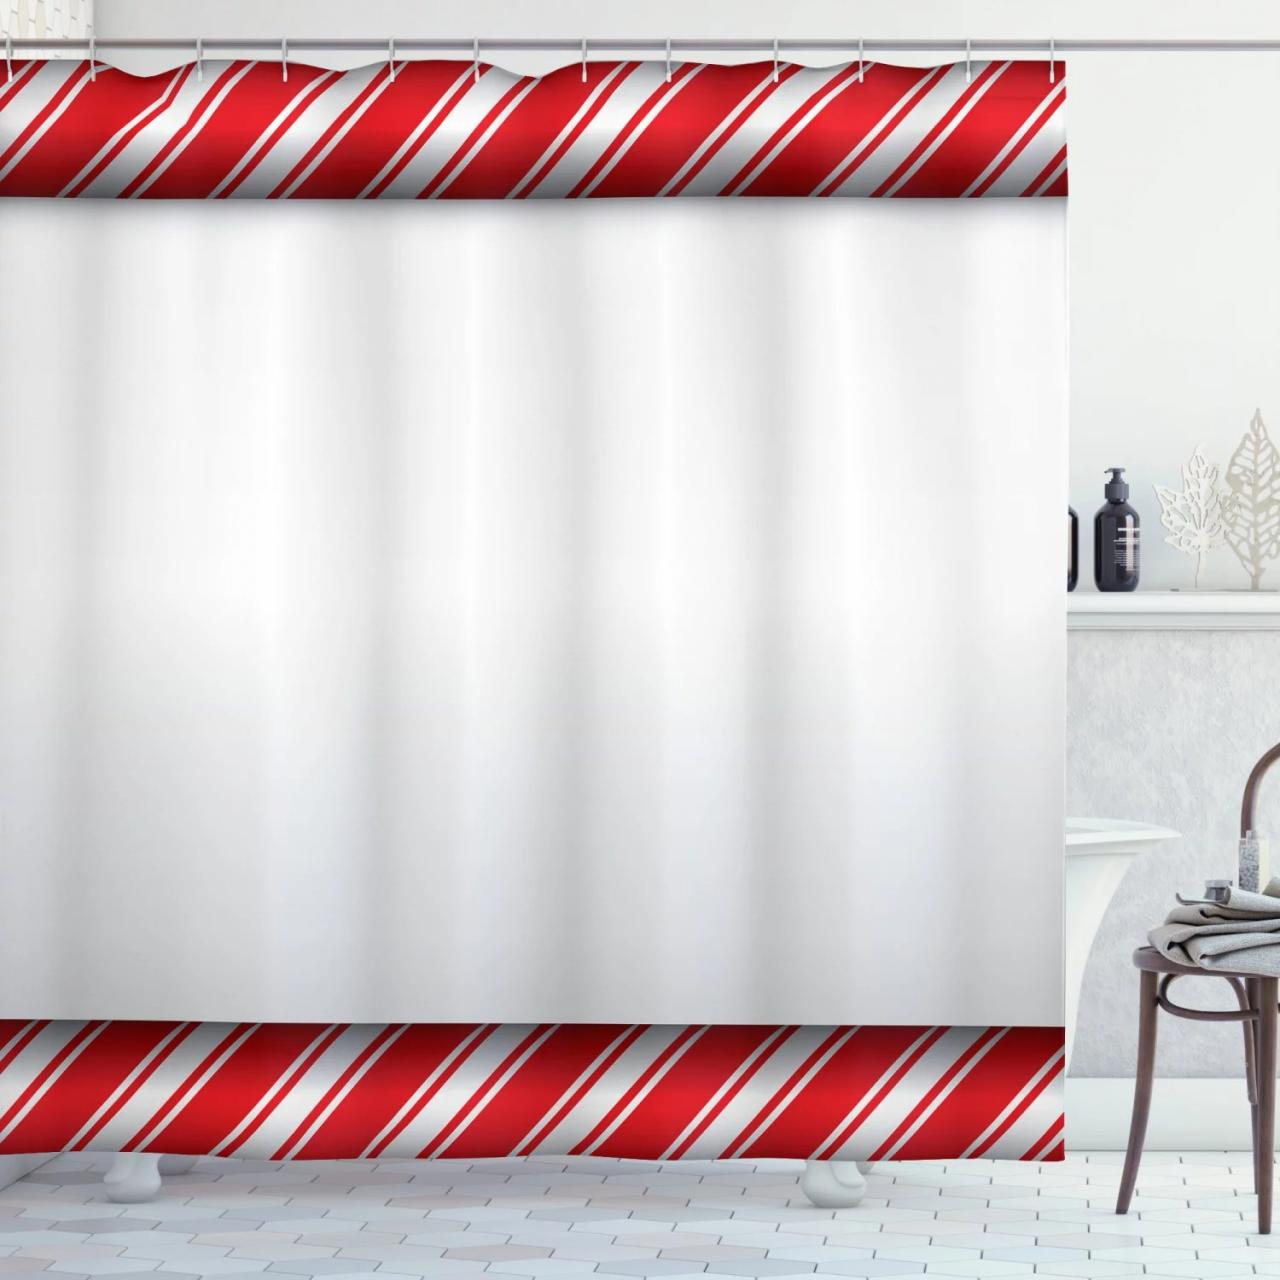 Candy Cane Shower Curtain, Horizontal Borders Frame with Red and White